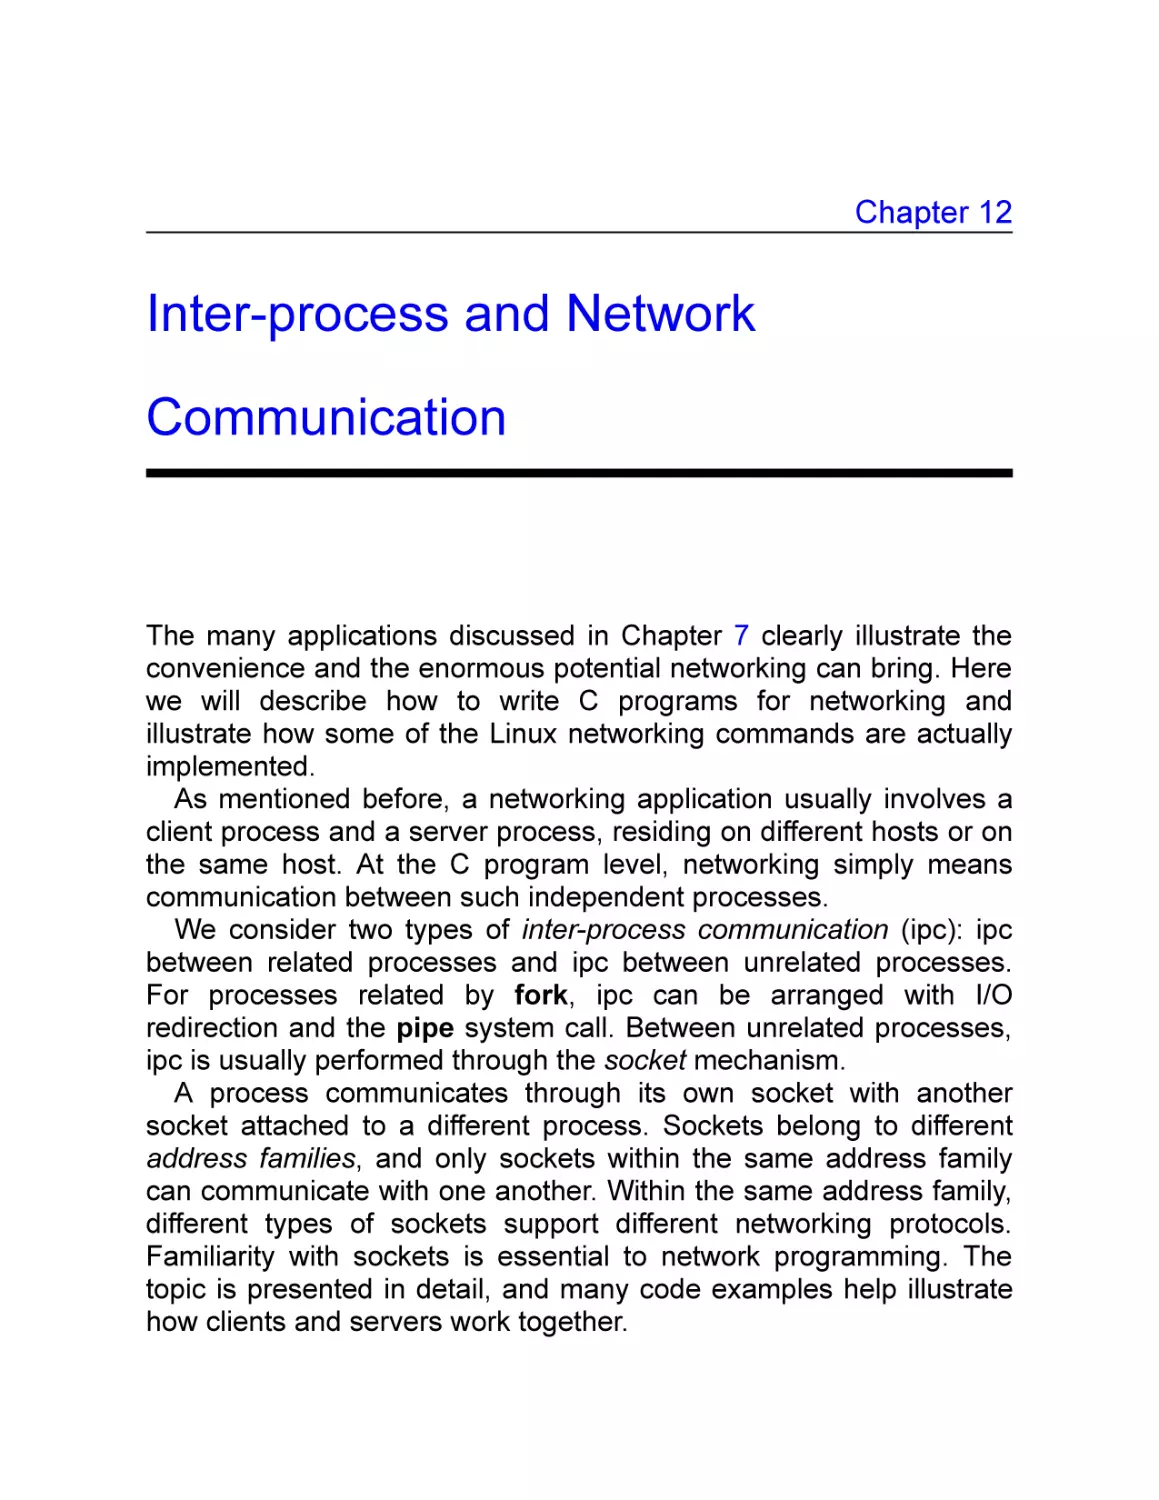 12 Inter-process and Network Communication